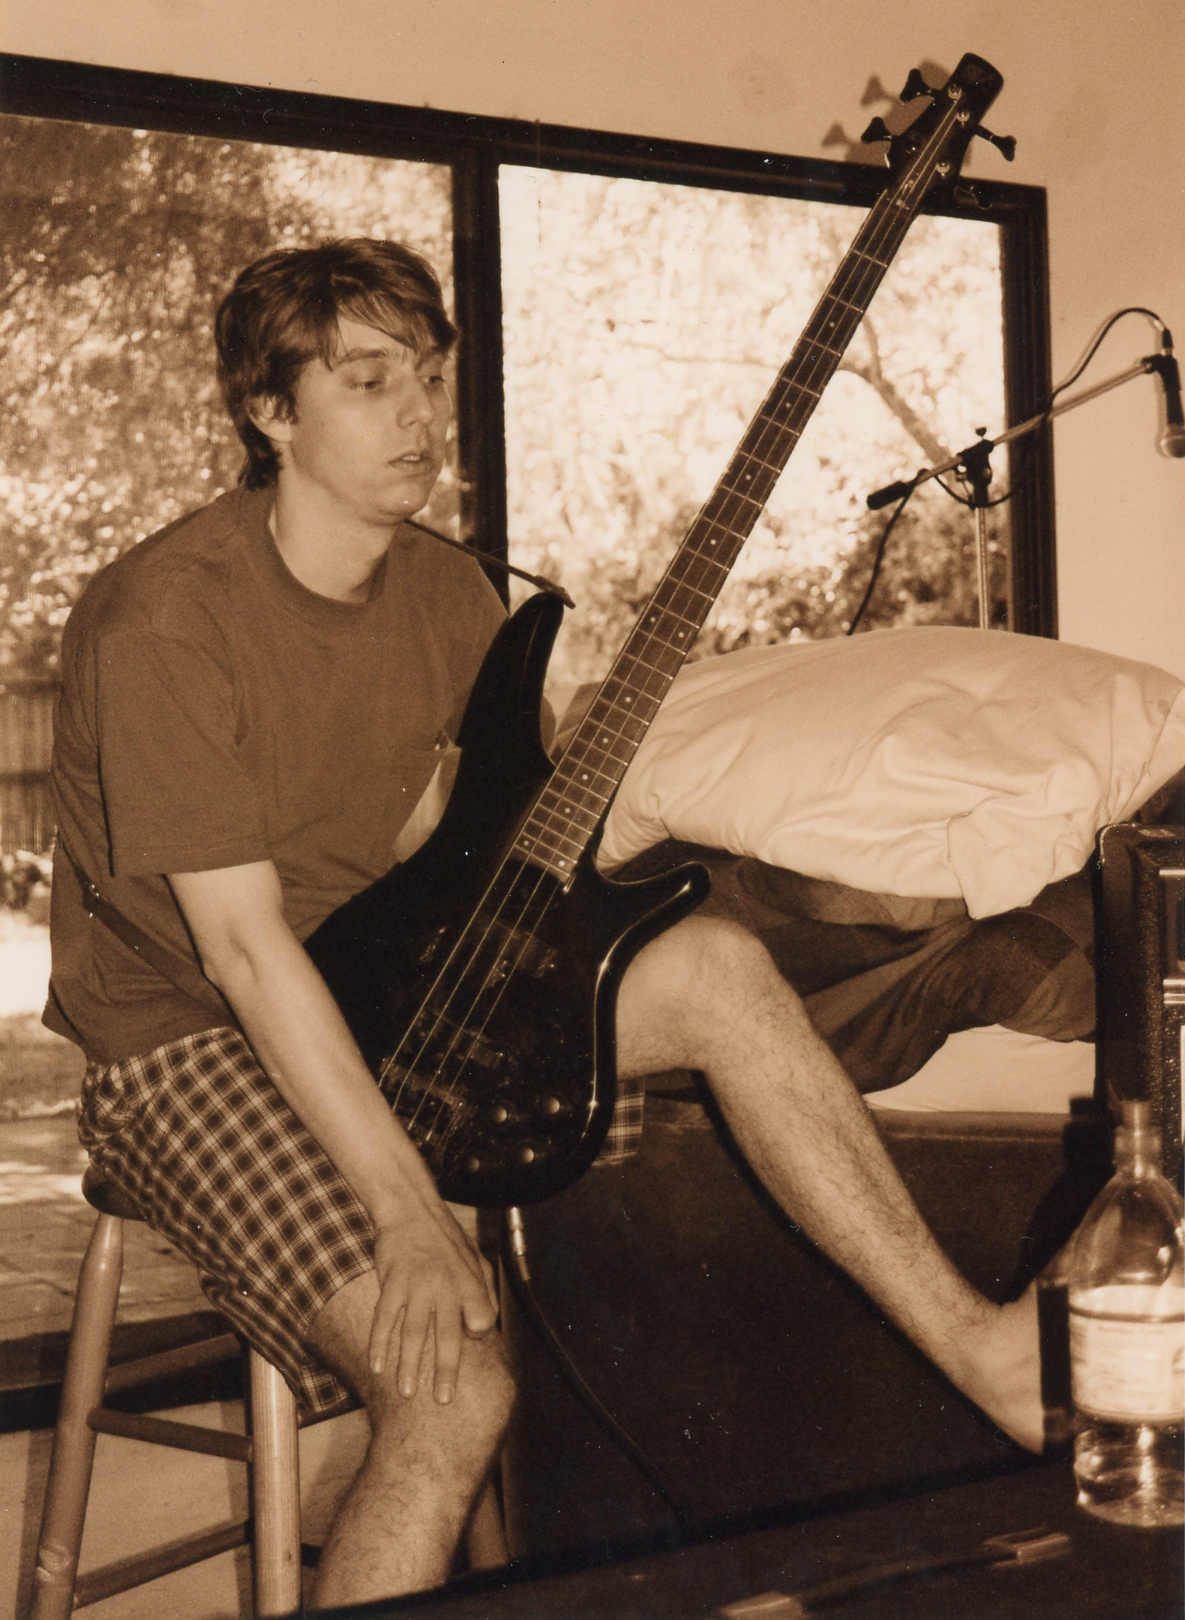 Brian with his bass in Davis, CA, summer 1999